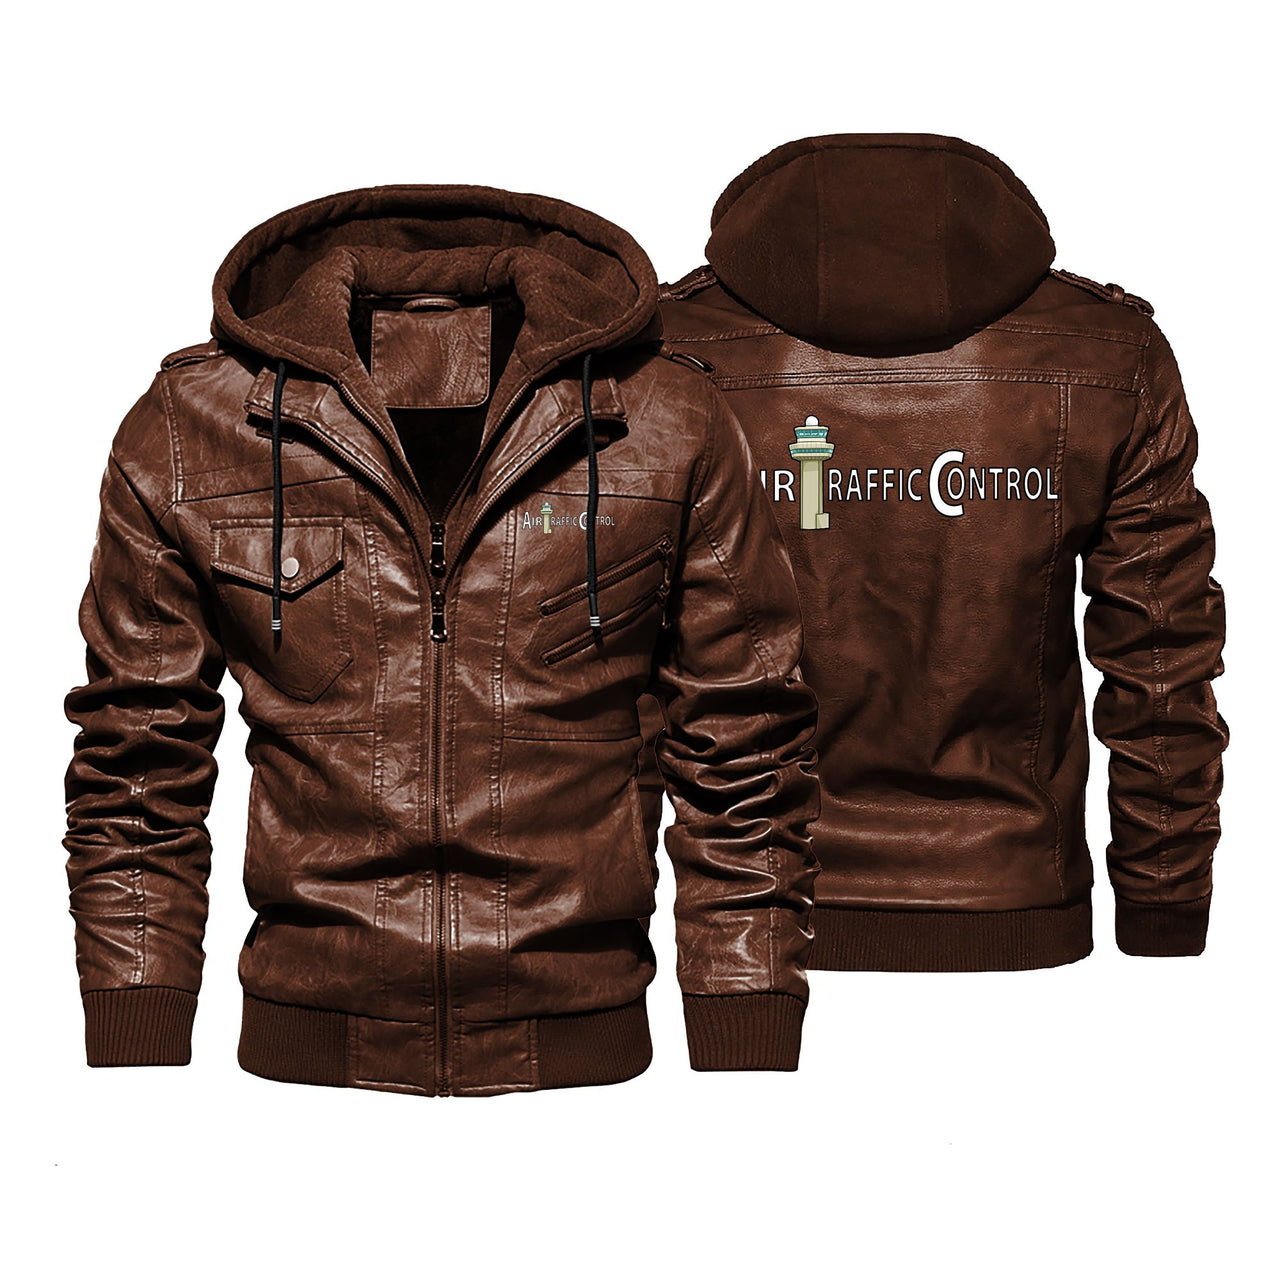 Air Traffic Control Designed Hooded Leather Jackets